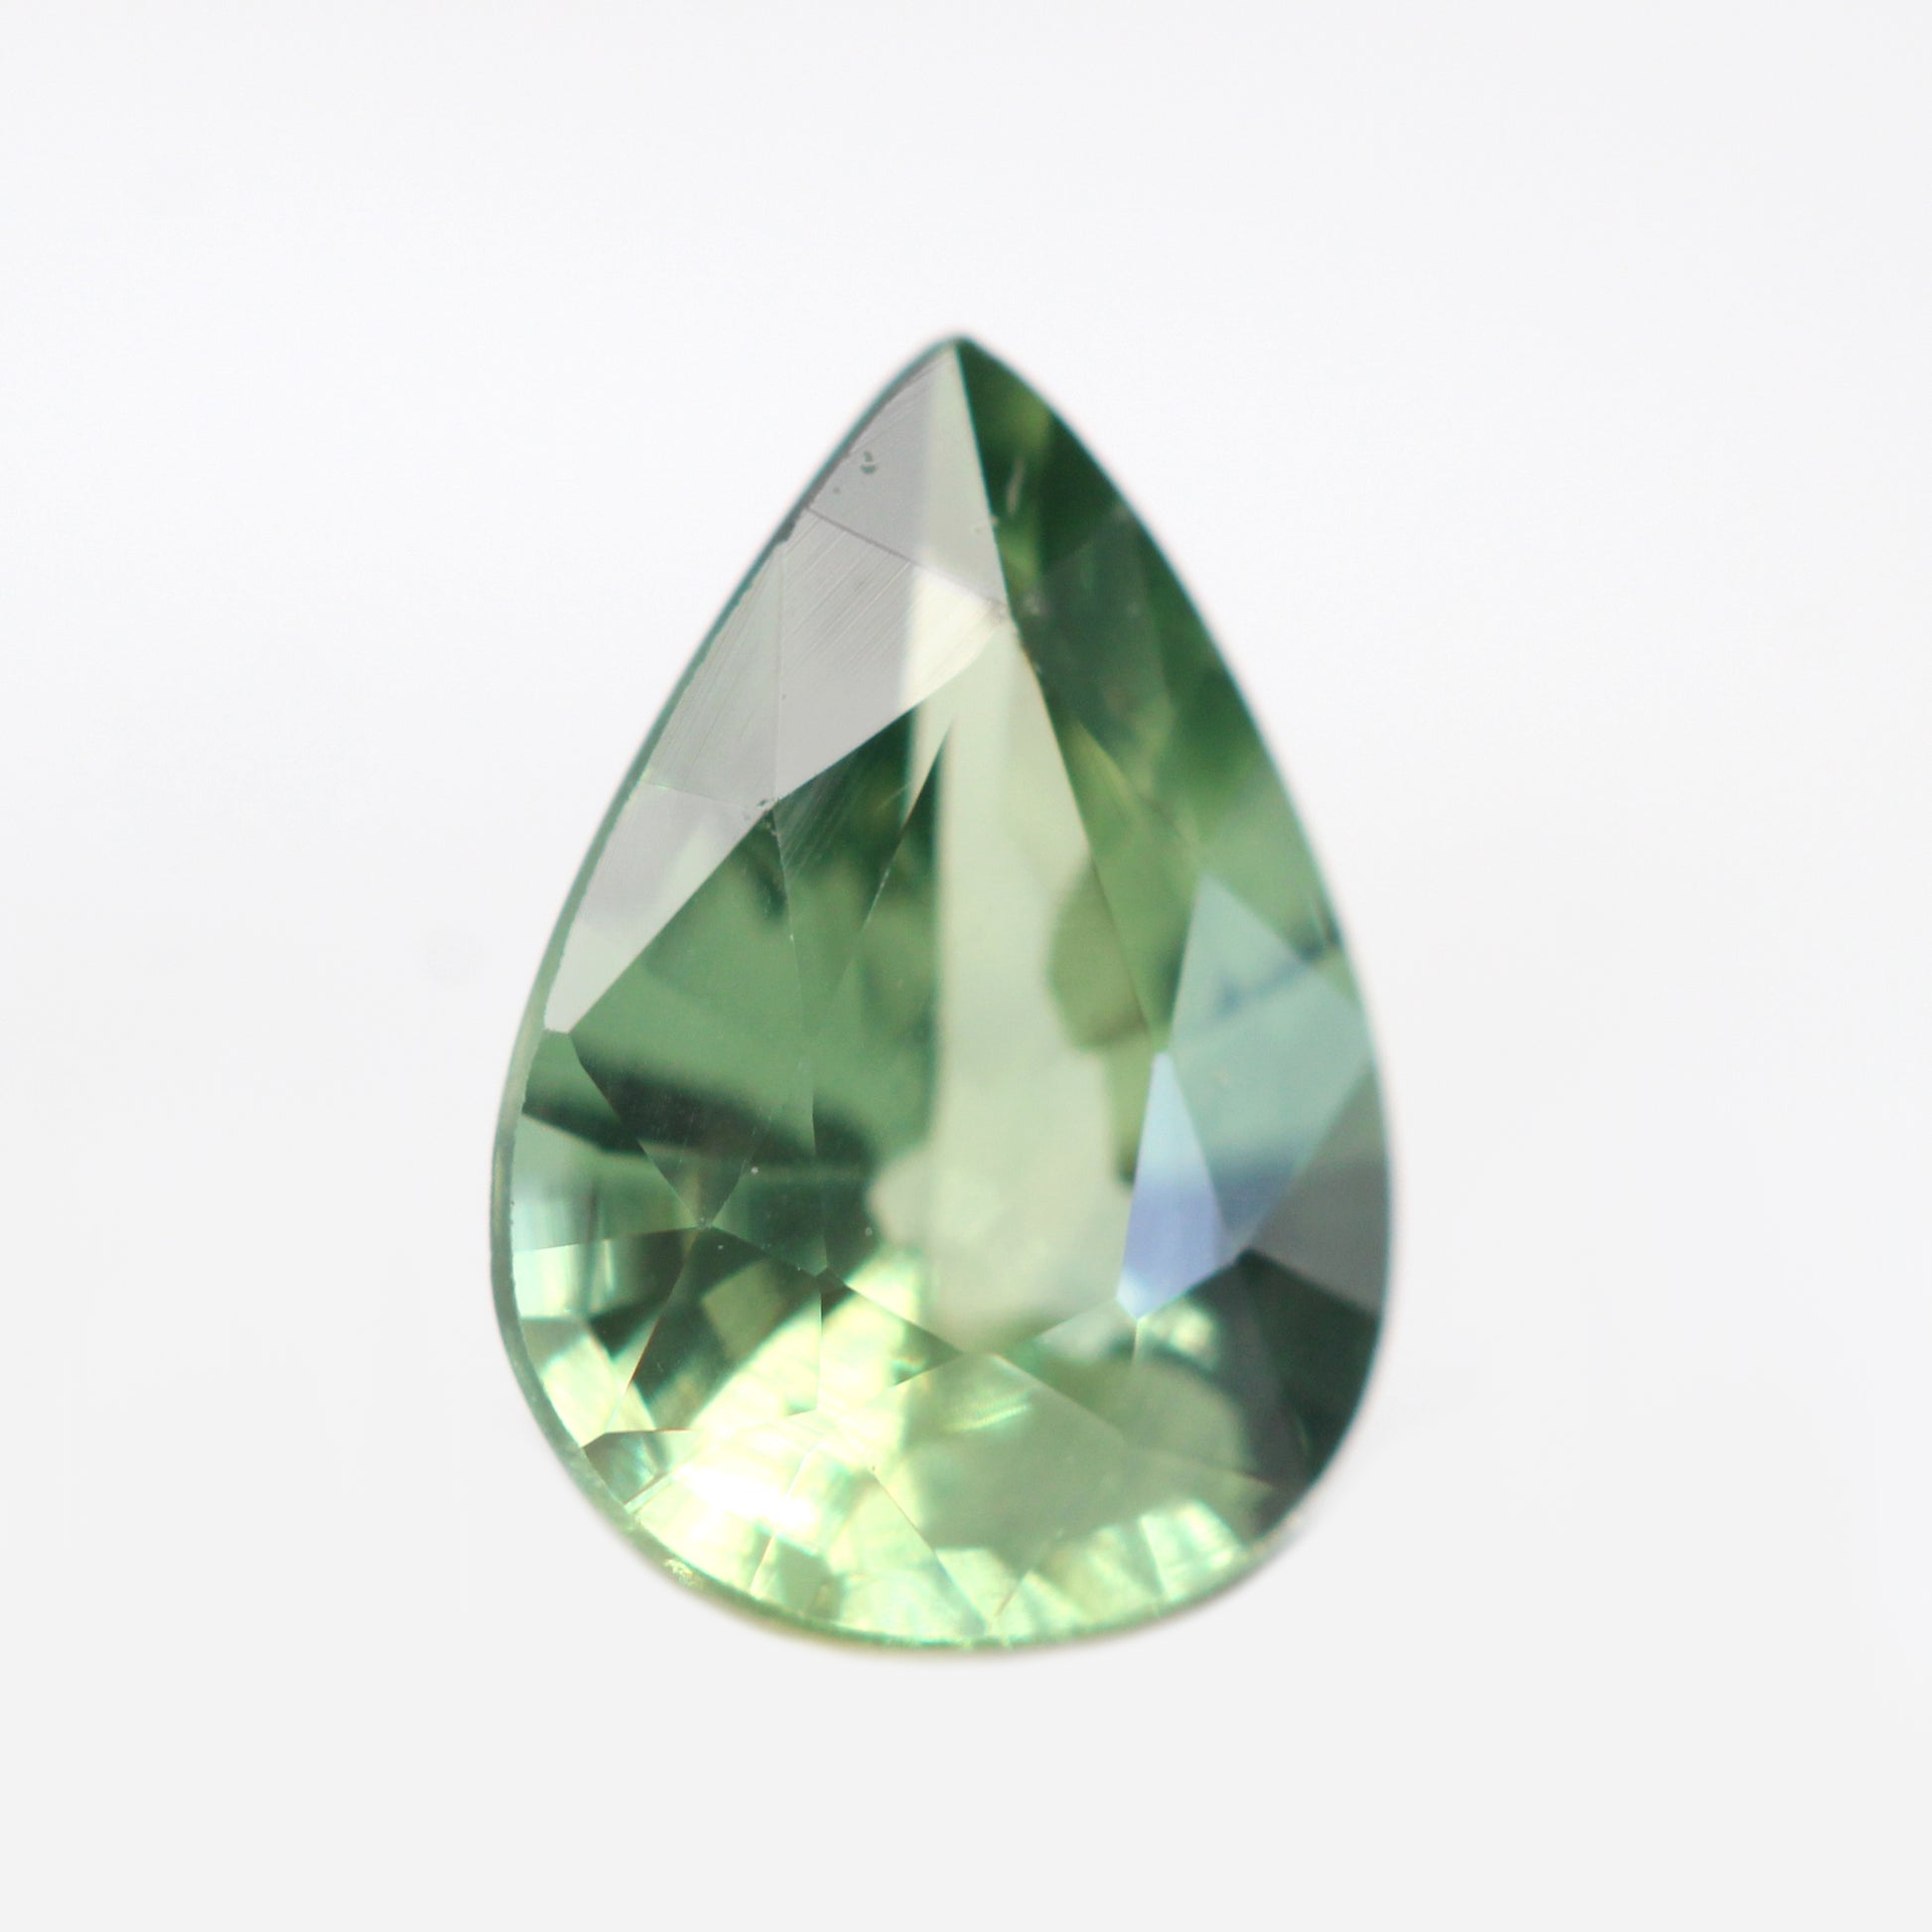 0.67 Carat Green Pear Sapphire for Custom Work - Inventory Code GPS067 - Midwinter Co. Alternative Bridal Rings and Modern Fine Jewelry